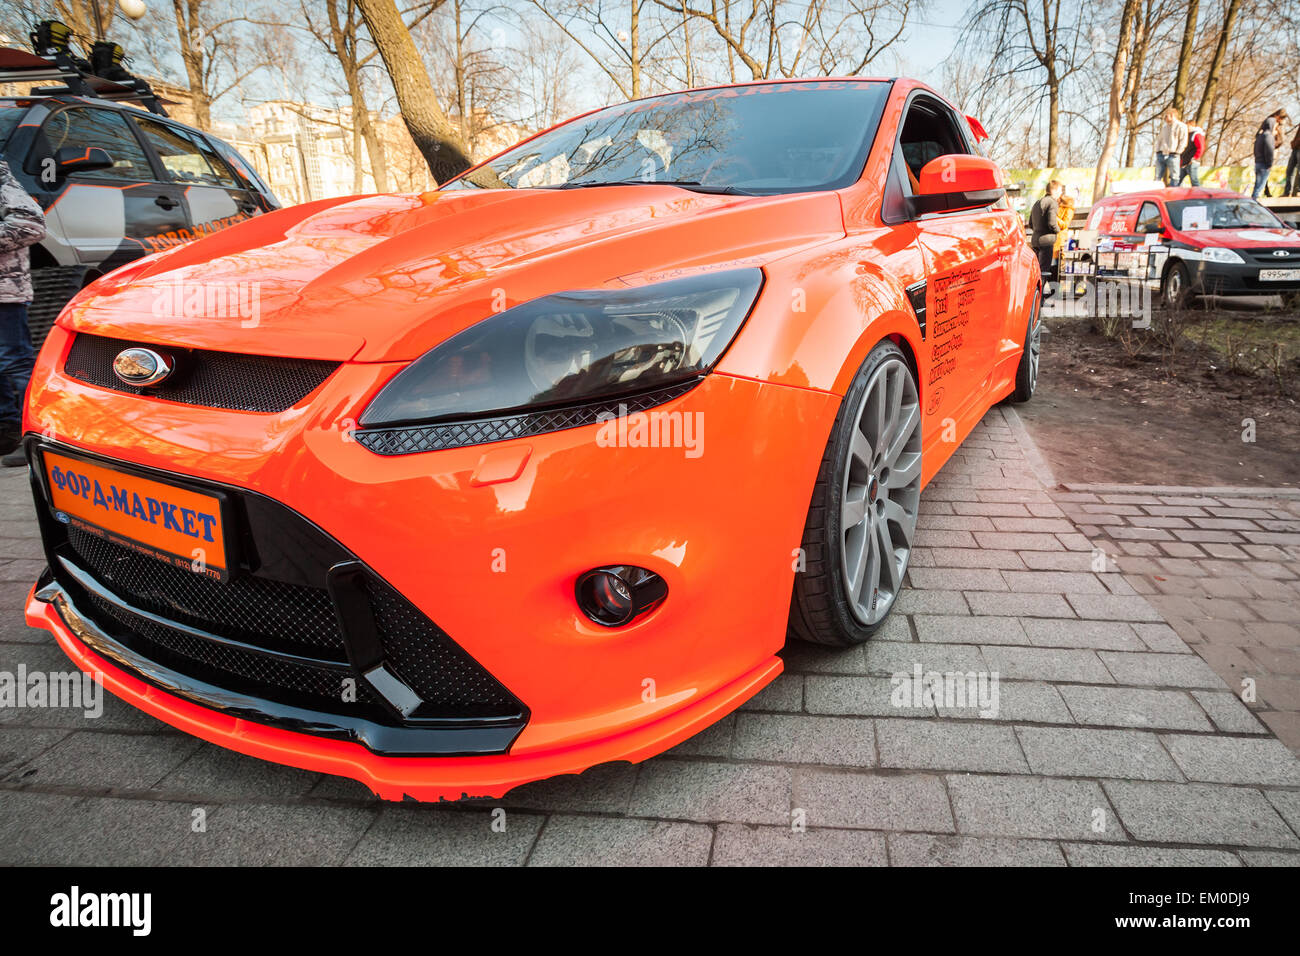 Saint-Petersburg, Russia - April 11, 2015: Bright orange sporty styled Ford focus car stands parked on the street. Wide angle cl Stock Photo